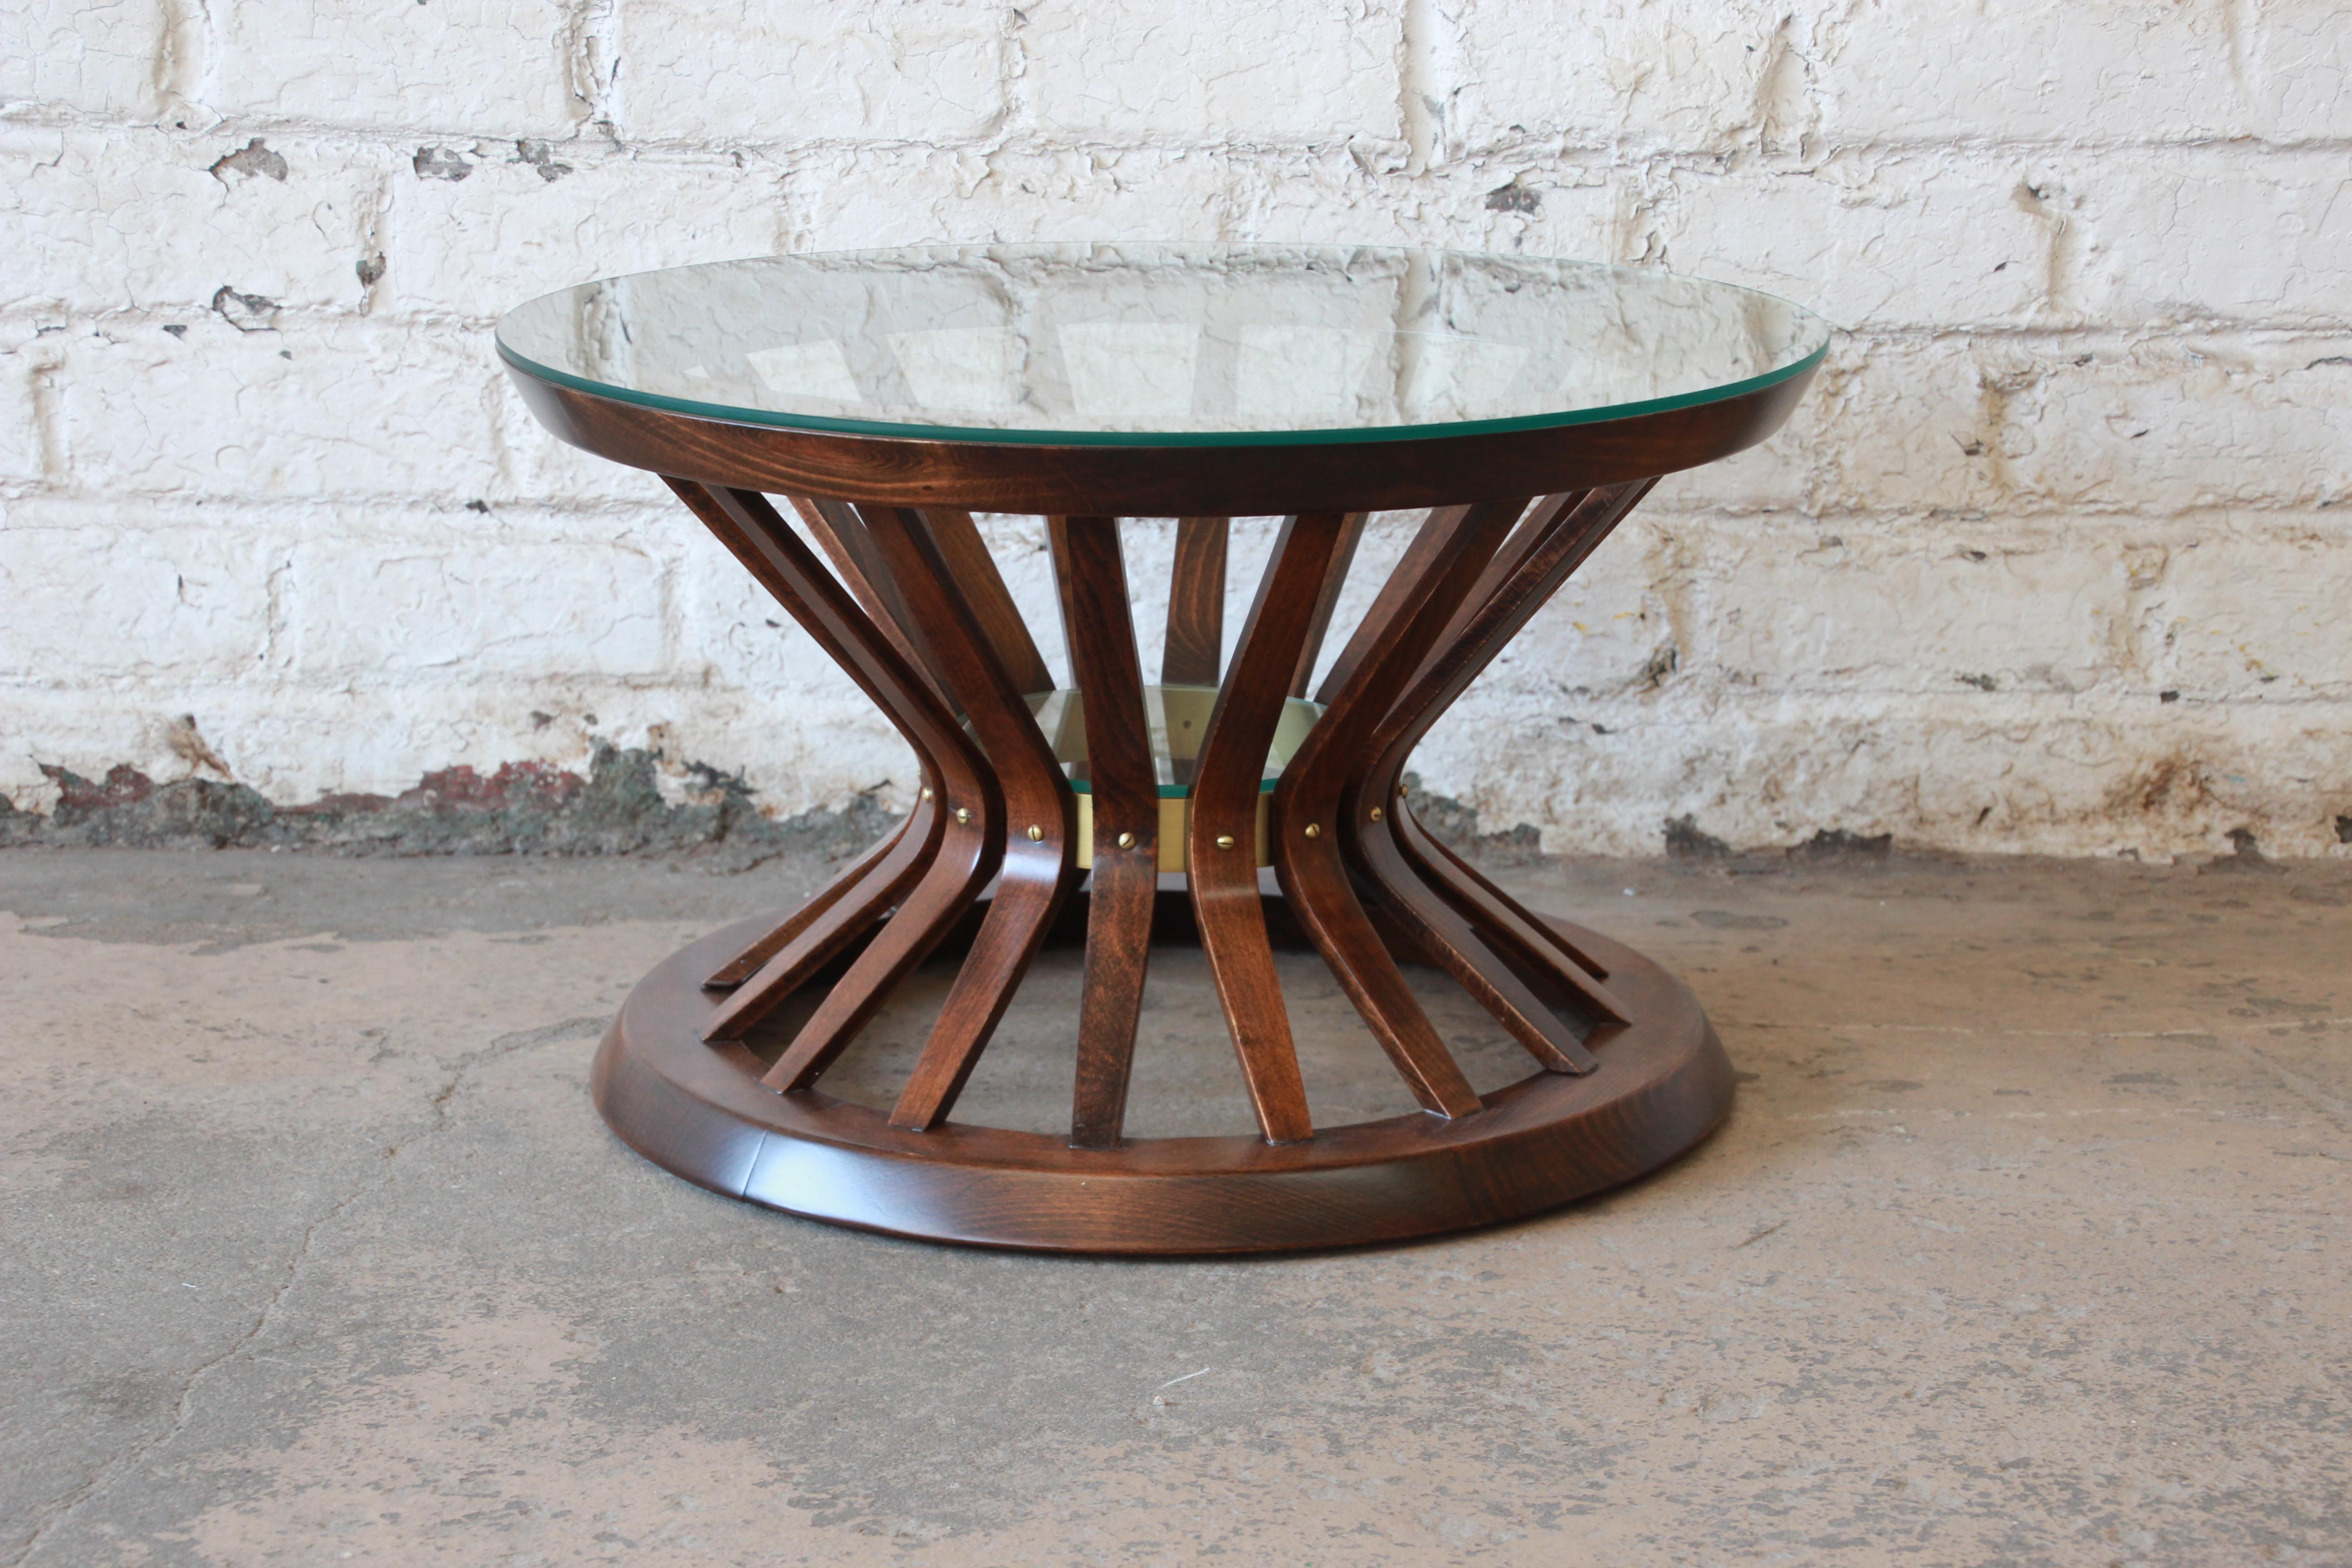 A stunning sheaf of wheat cocktail or occasional table designed by Edward Wormley for Dunbar. The table features a gorgeous walnut base, with brass accent, and a round glass top. The base has been professionally refinished and is in excellent